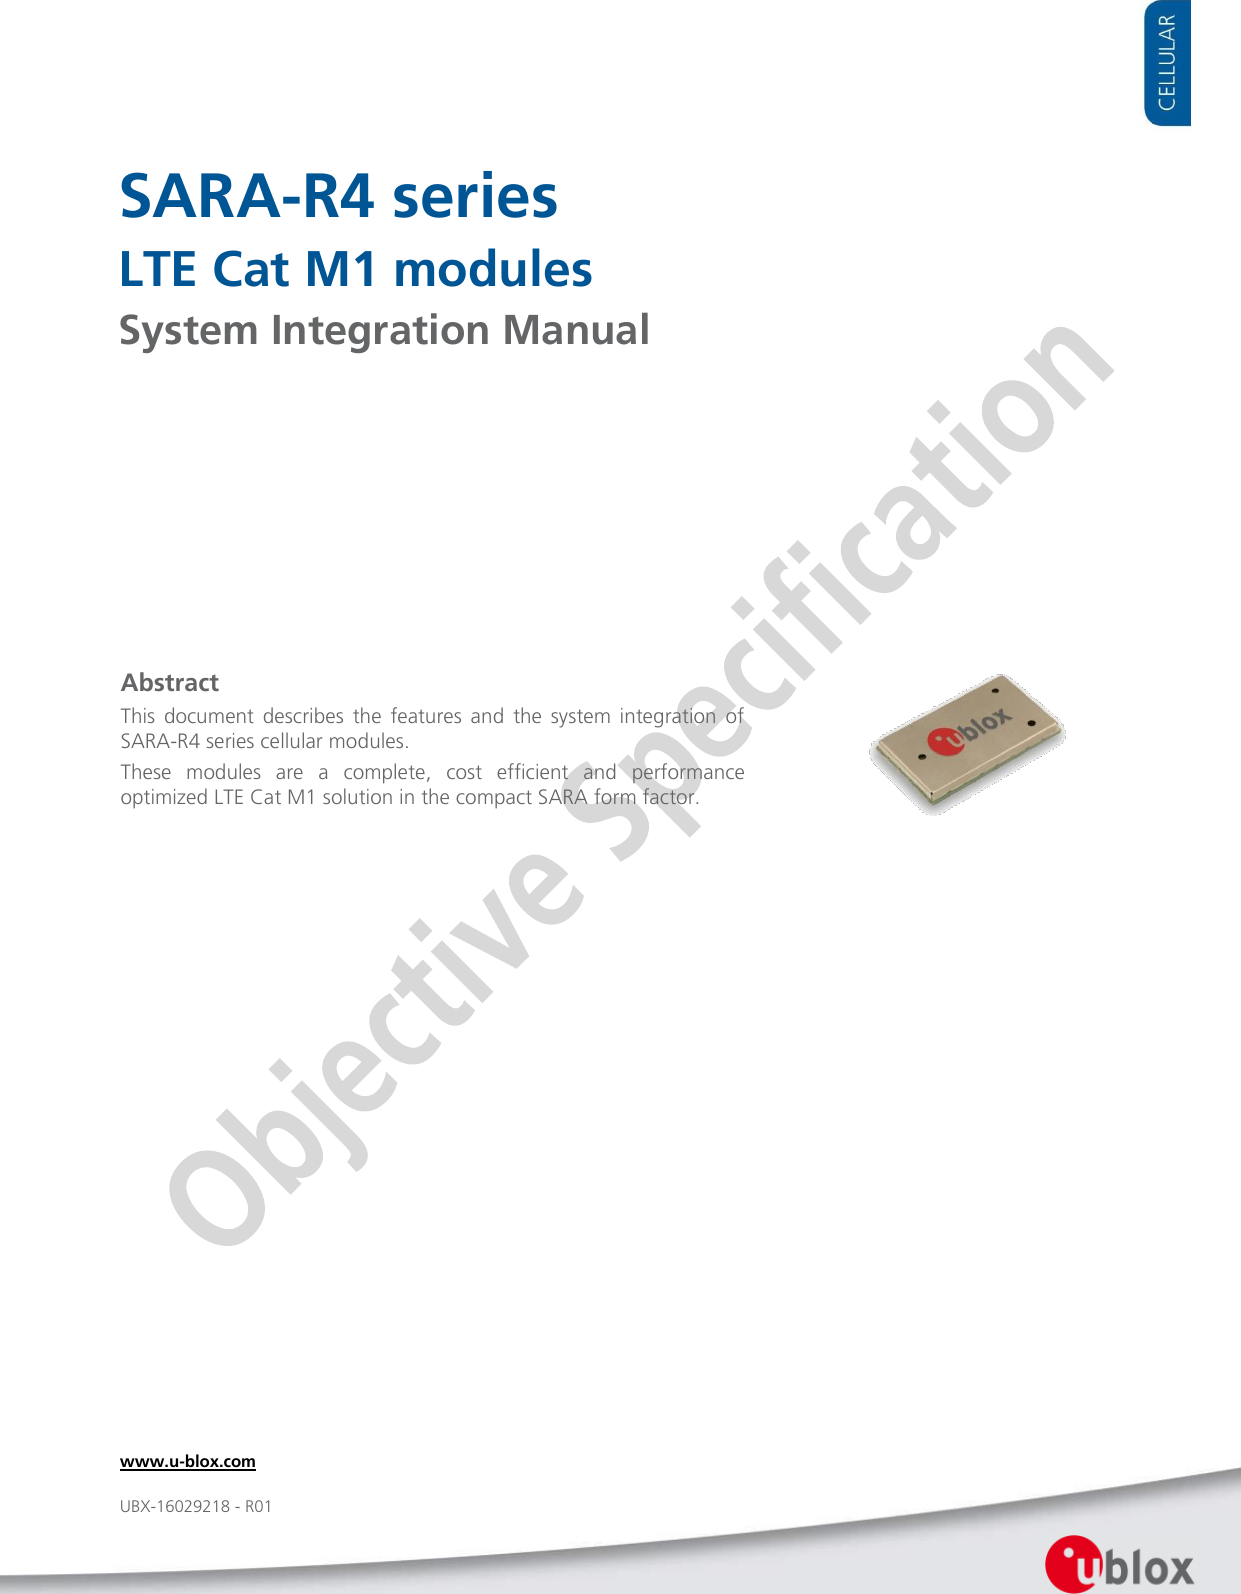     SARA-R4 series LTE Cat M1 modules System Integration Manual               Abstract This  document  describes  the  features  and  the  system  integration  of SARA-R4 series cellular modules. These  modules  are  a  complete,  cost  efficient  and  performance optimized LTE Cat M1 solution in the compact SARA form factor. www.u-blox.com UBX-16029218 - R01 